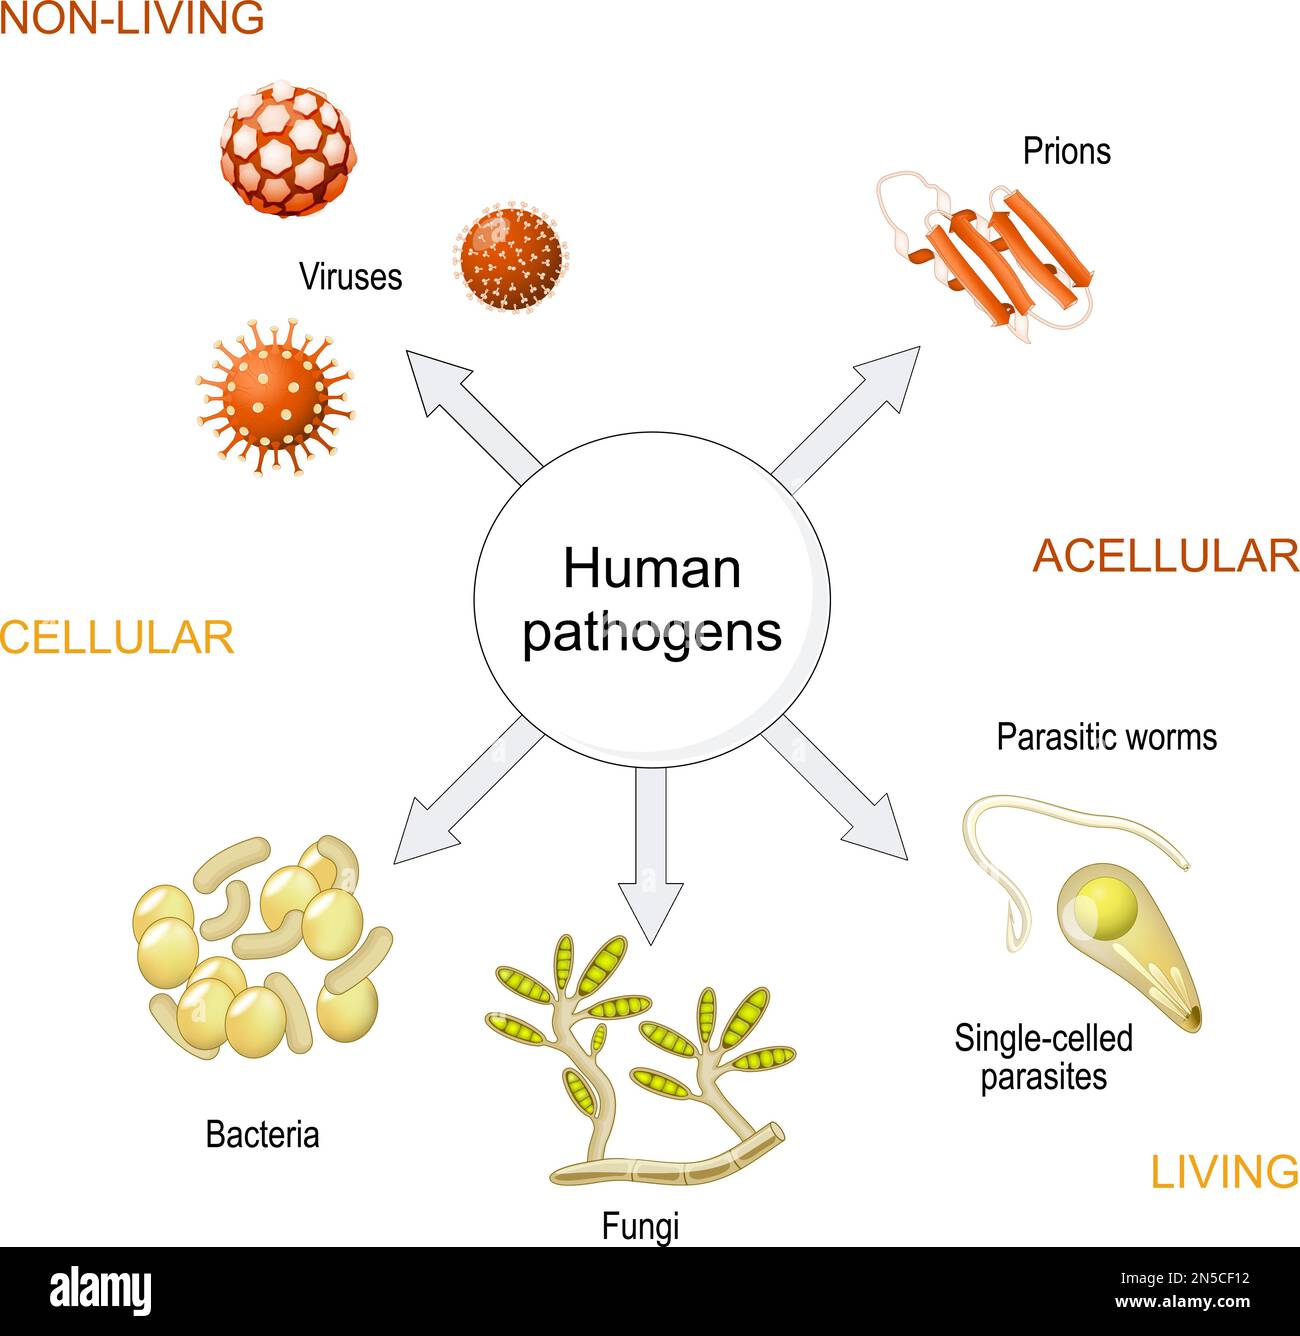 types of infectious agents from prions and viruses, to bacteria, fungi, worms, single-celled and unicellular organisms. detailed diagram about Acellul Stock Vector